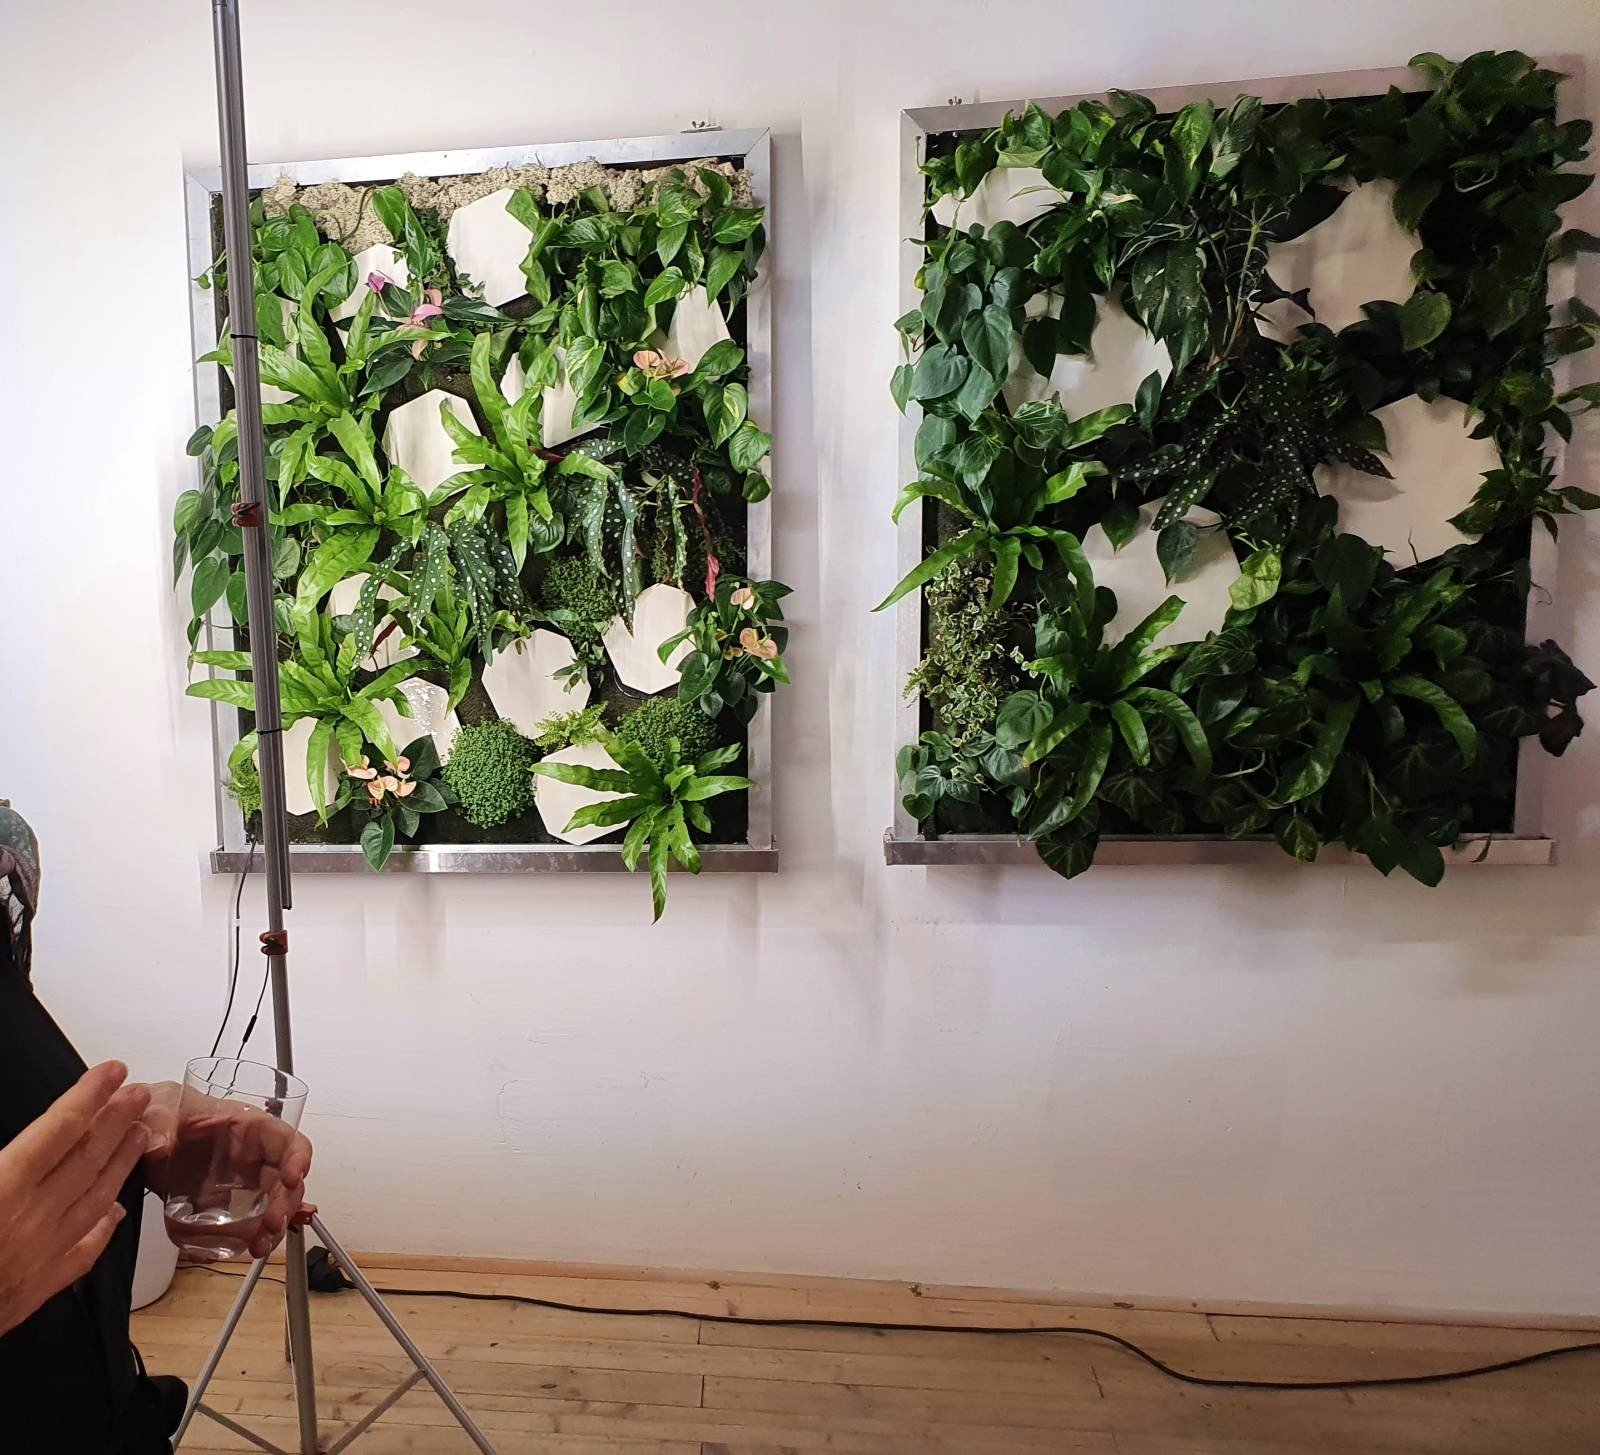 Miki Martinek in front of her and Sebastian Hipold´s plant picture "Praterstern, Merry go round" 